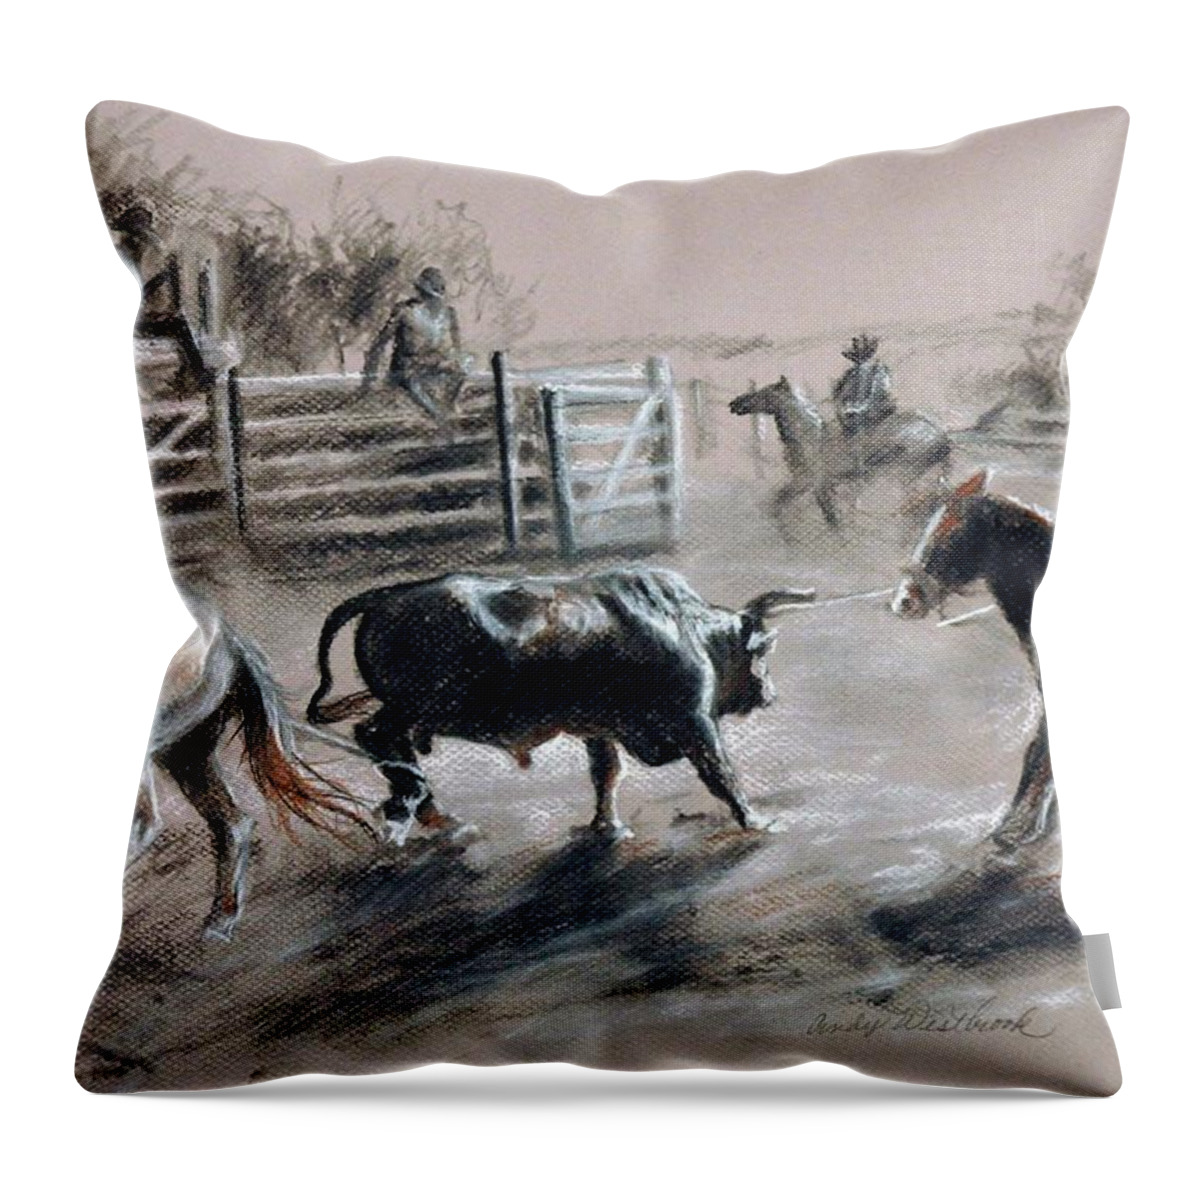 Bull Throw Pillow featuring the drawing The Bad Boy by Cynthia Westbrook